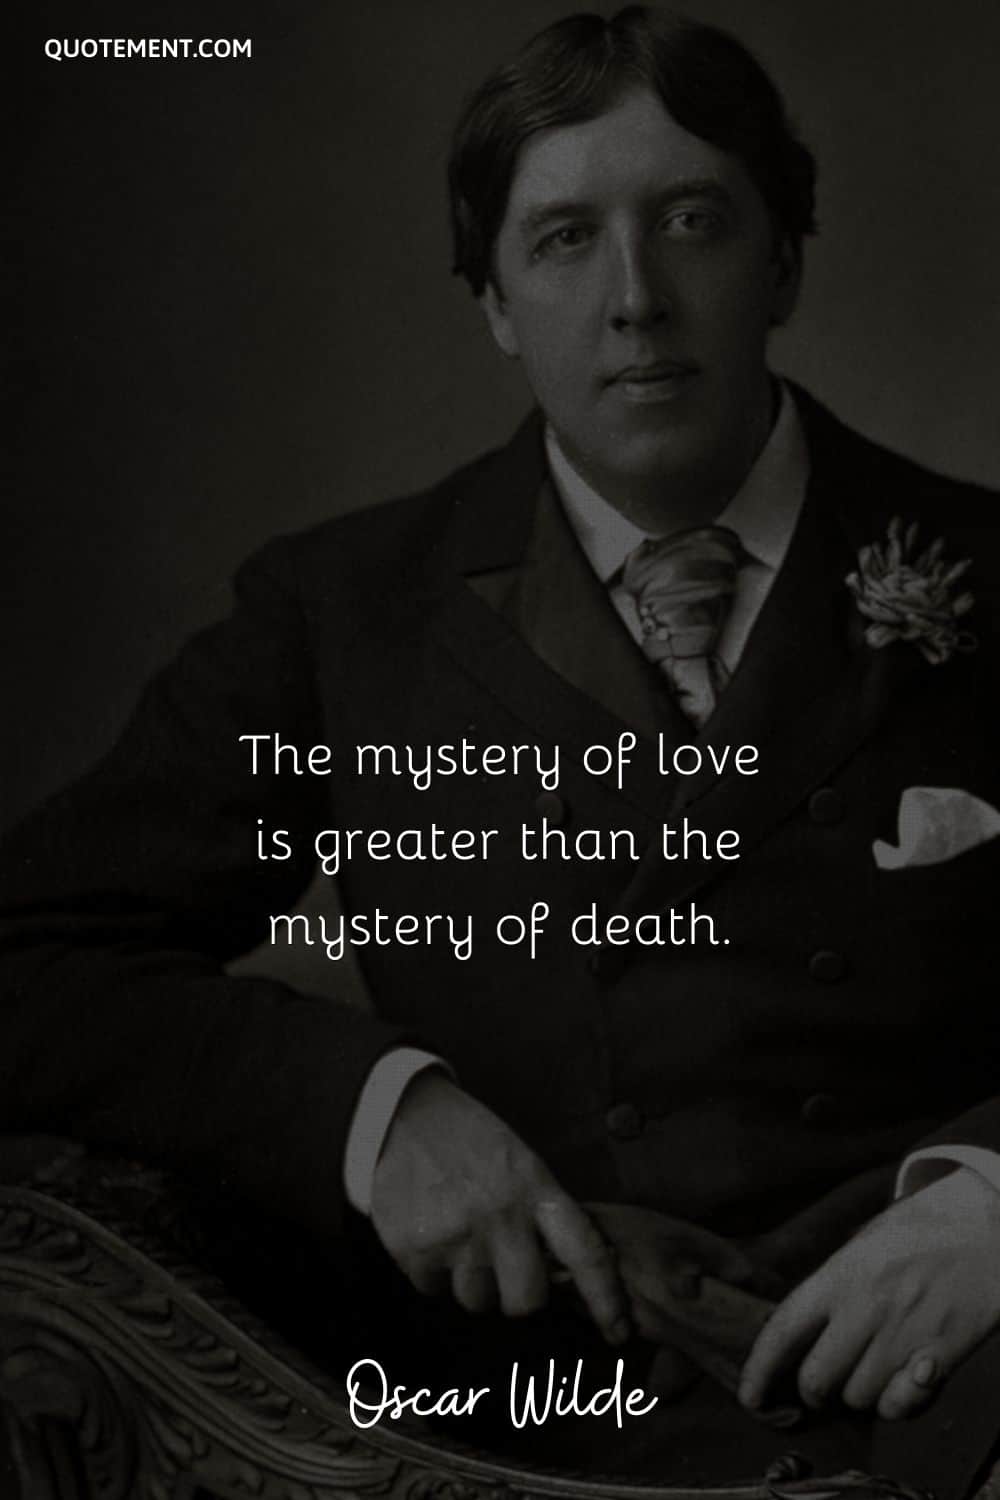 The mystery of love is greater than the mystery of death